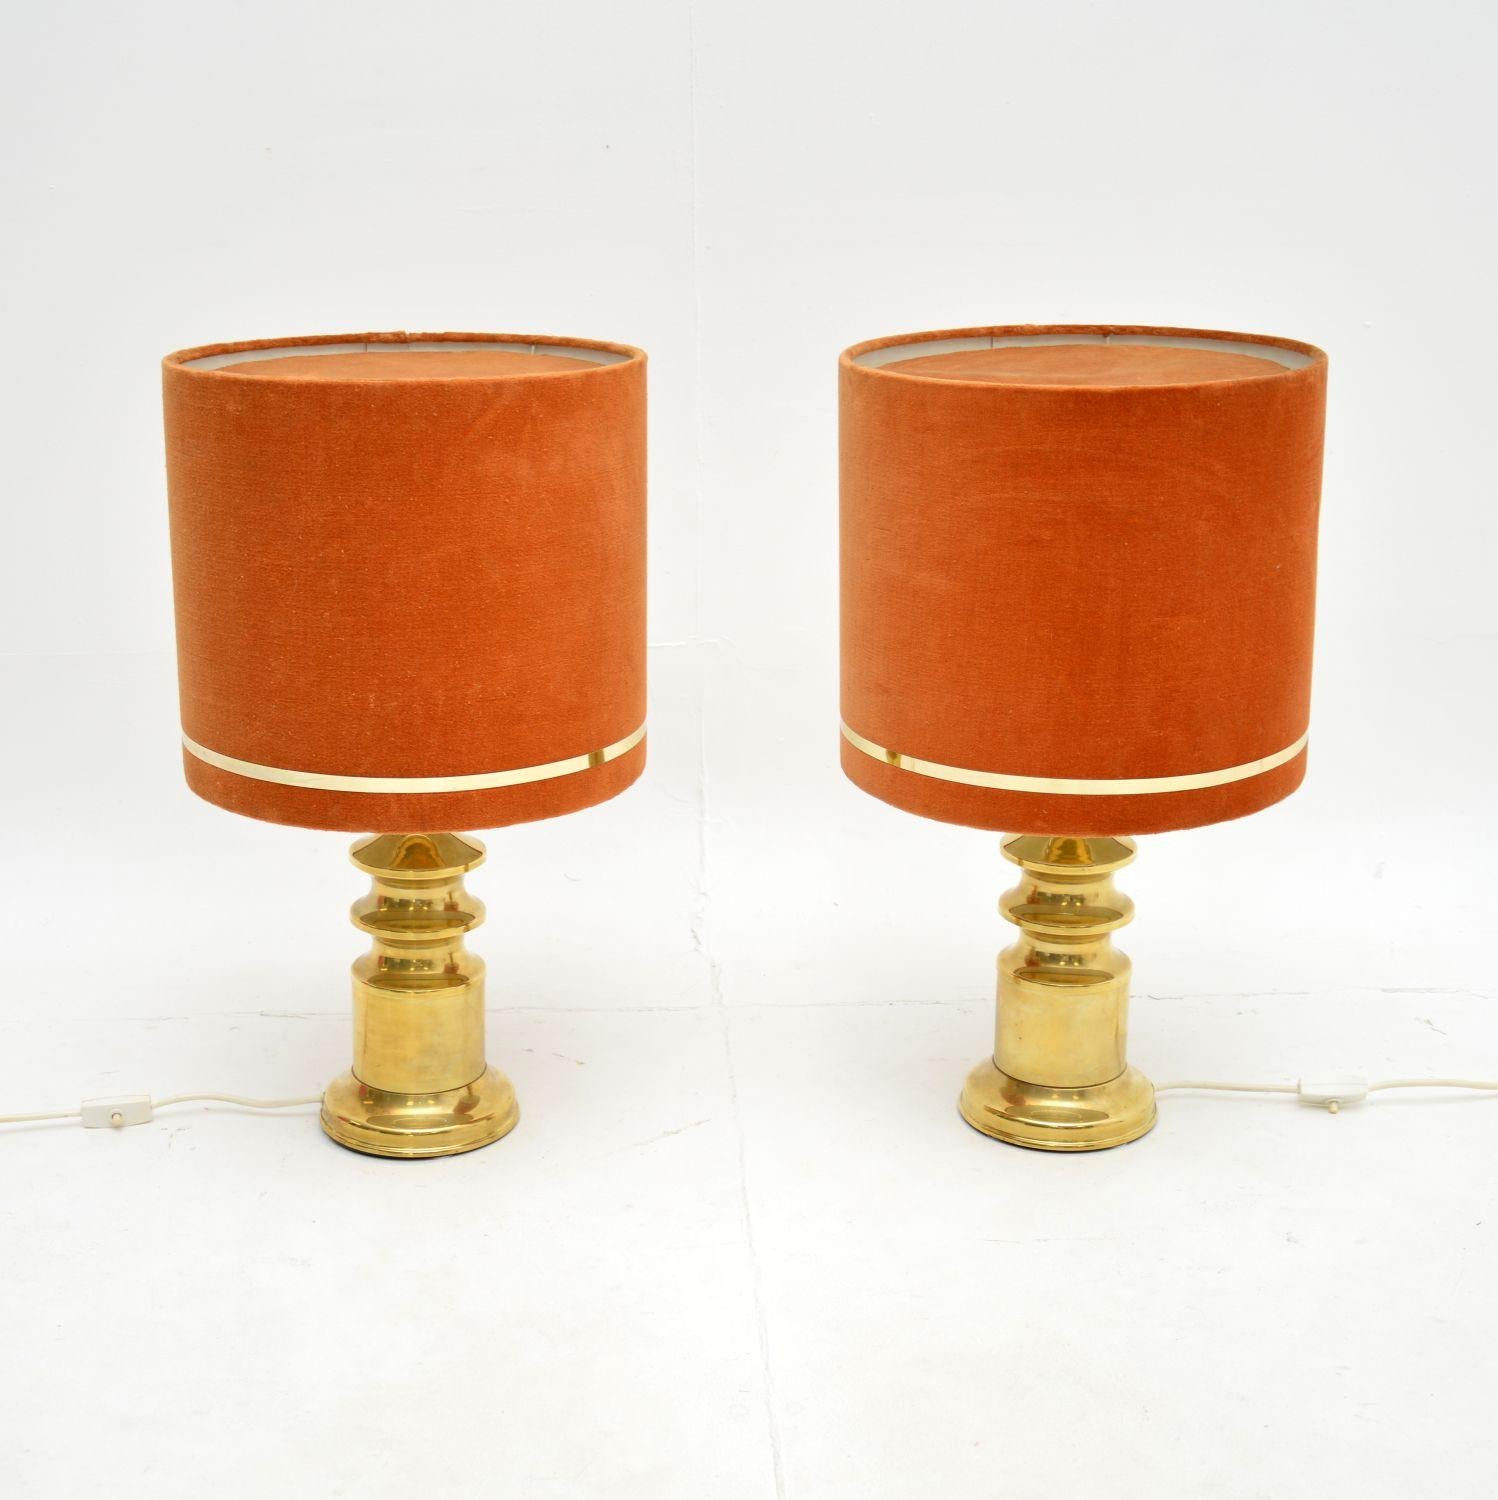 A beautiful pair of vintage brass table lamps with velvet shades. They were made in France, and they date from the 1970’s.

The quality is lovely, the solid brass lamp stands are beautifully made and have a bold design. They come with original